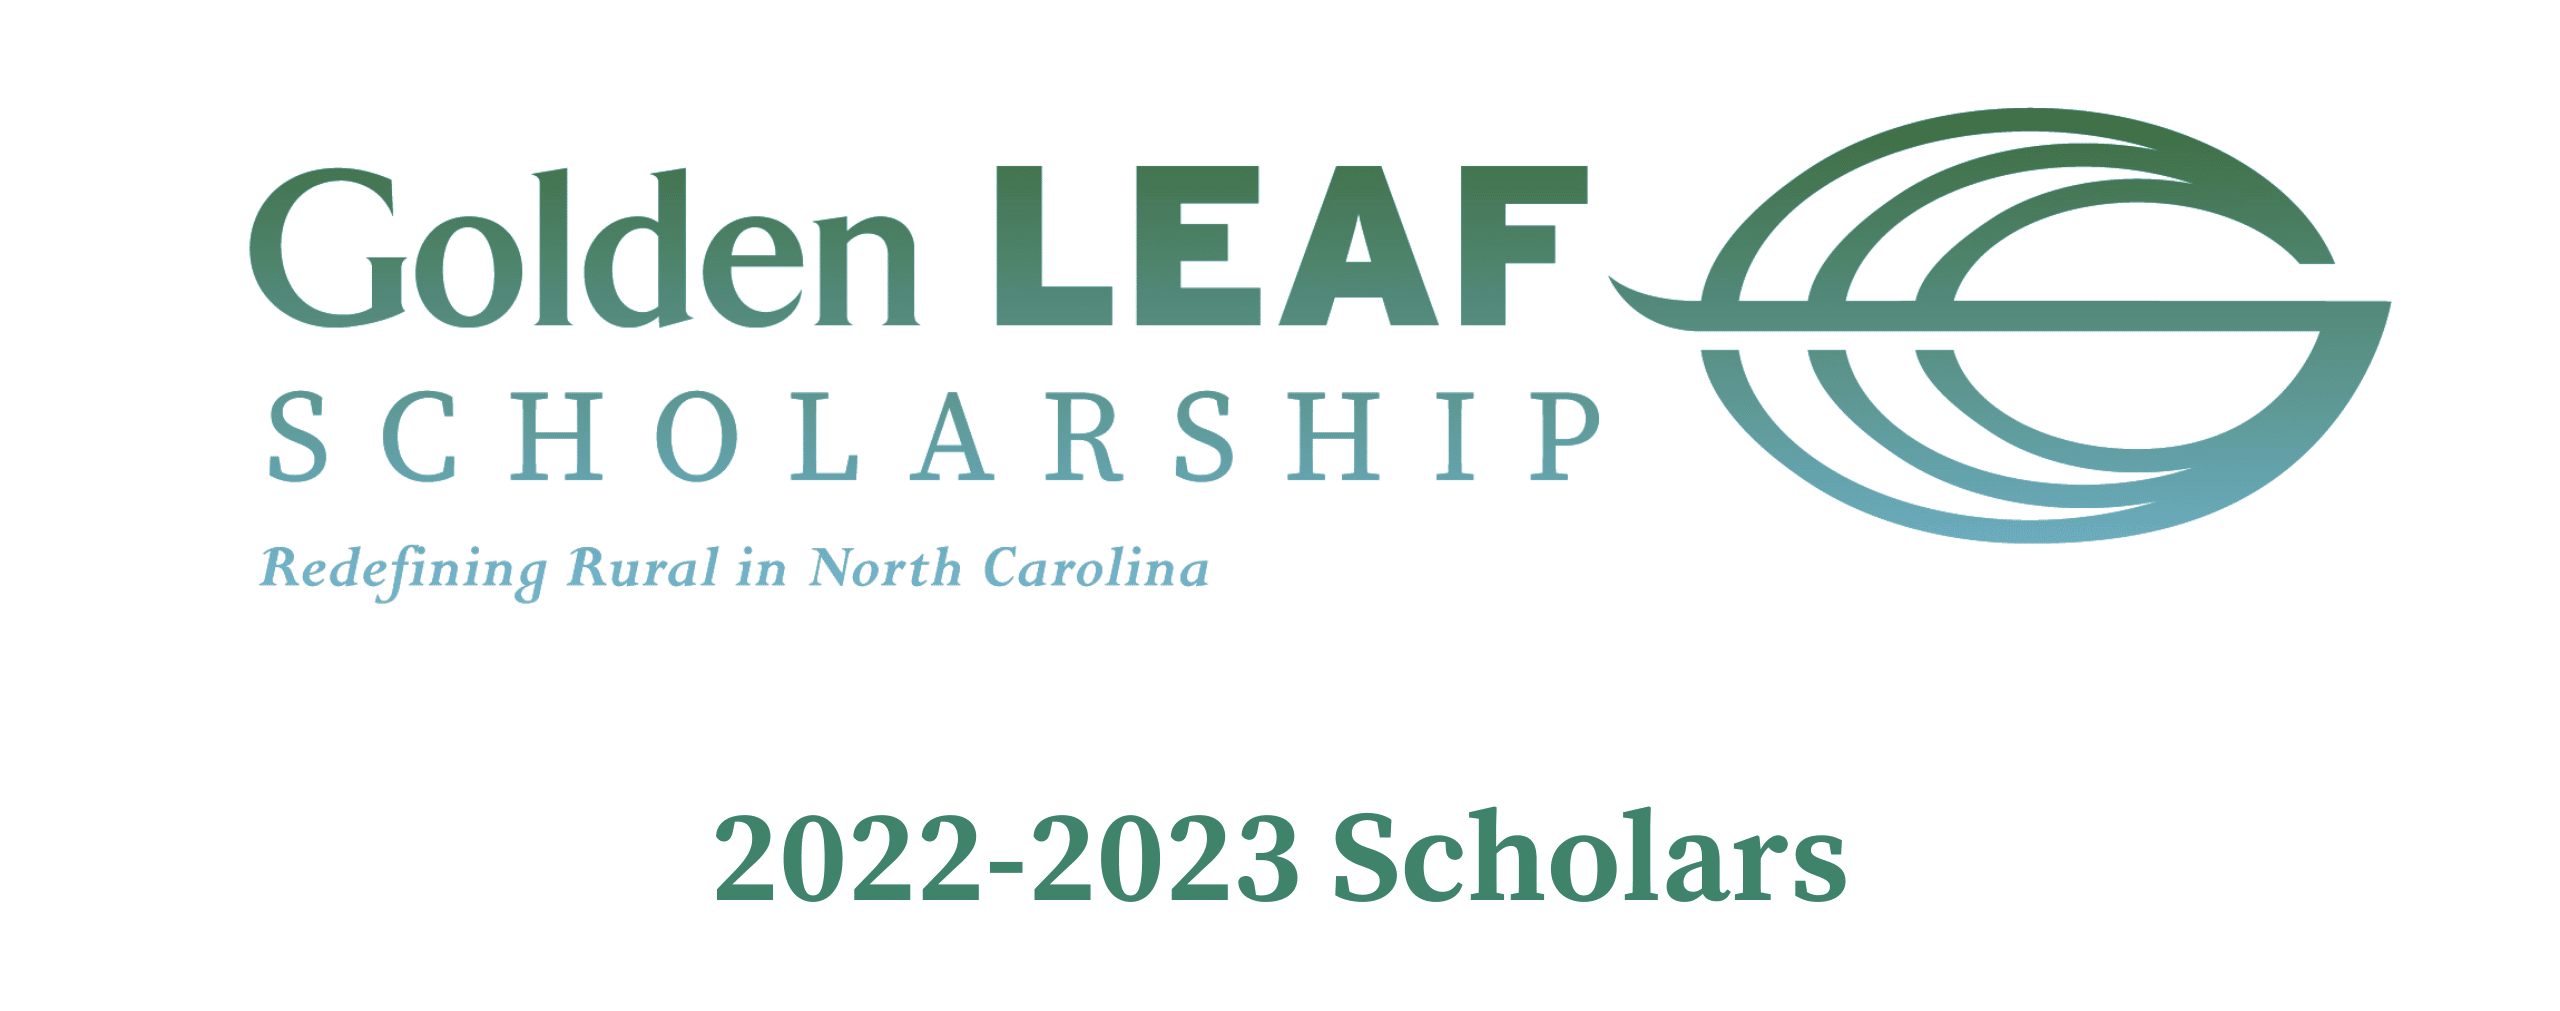 Golden LEAF announces award of 215 scholarships to rural high school seniors and community college transfer students